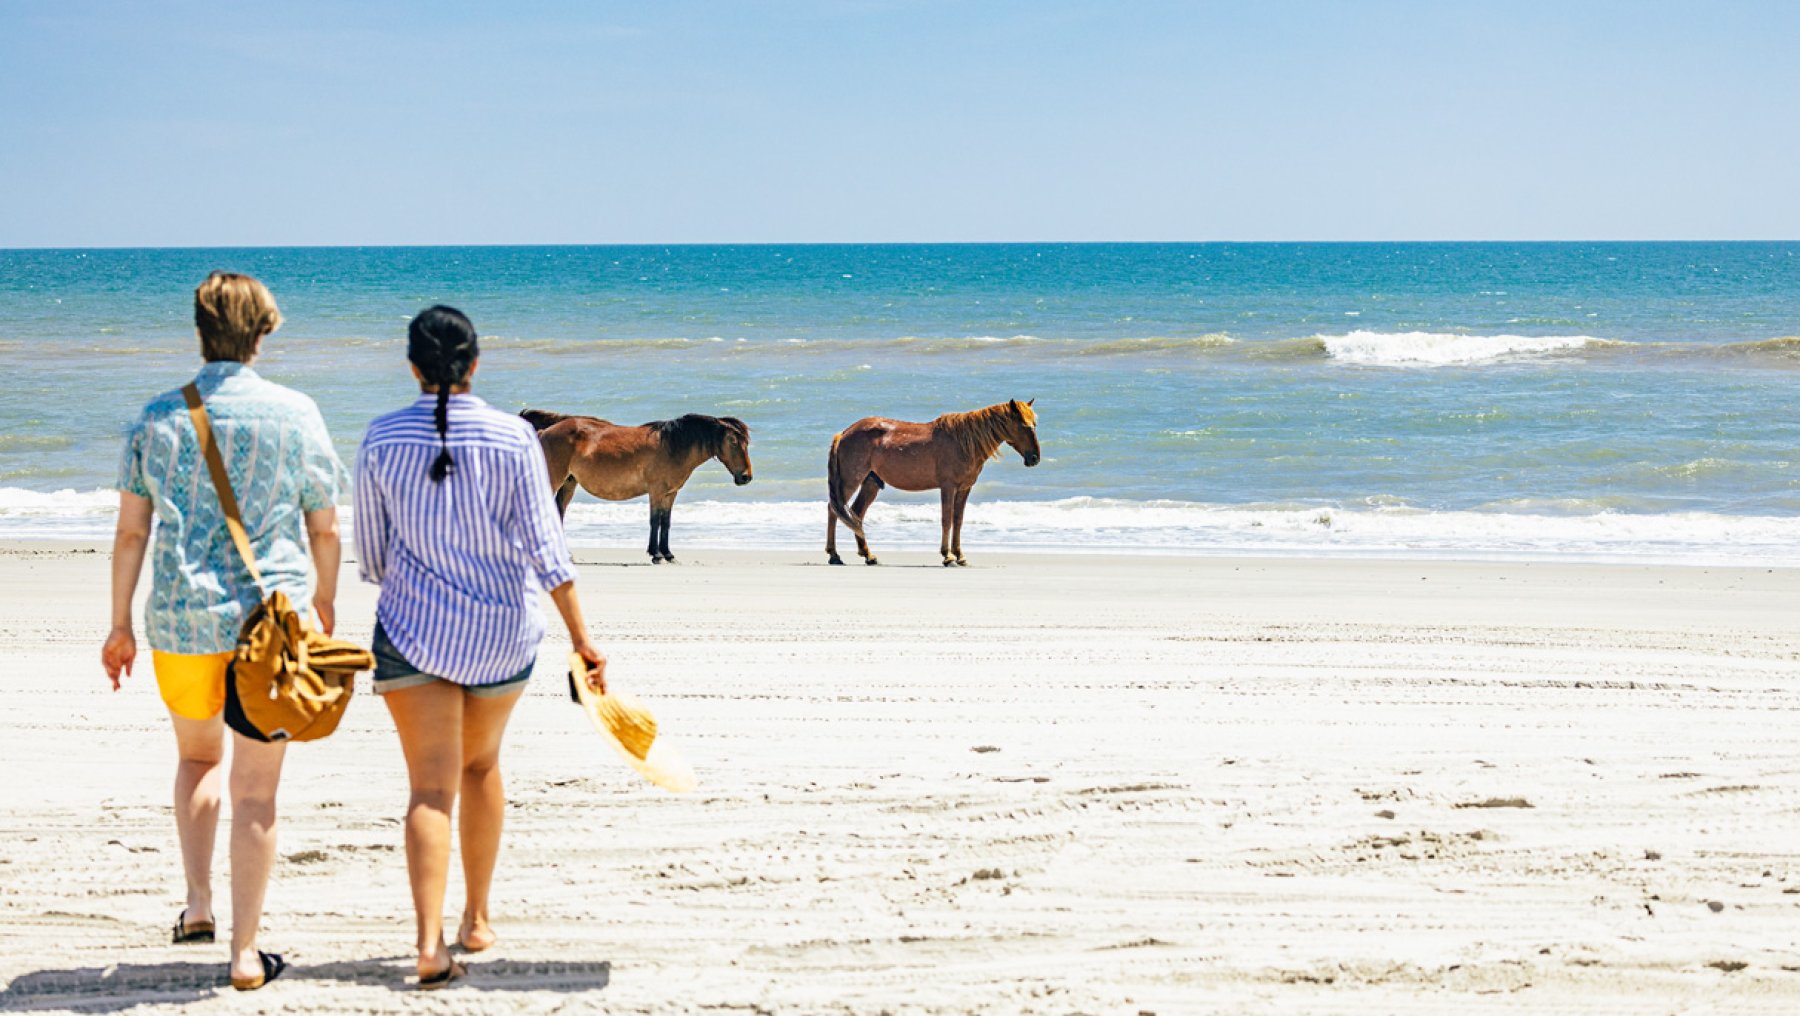 Two women observe wild horses on the beach